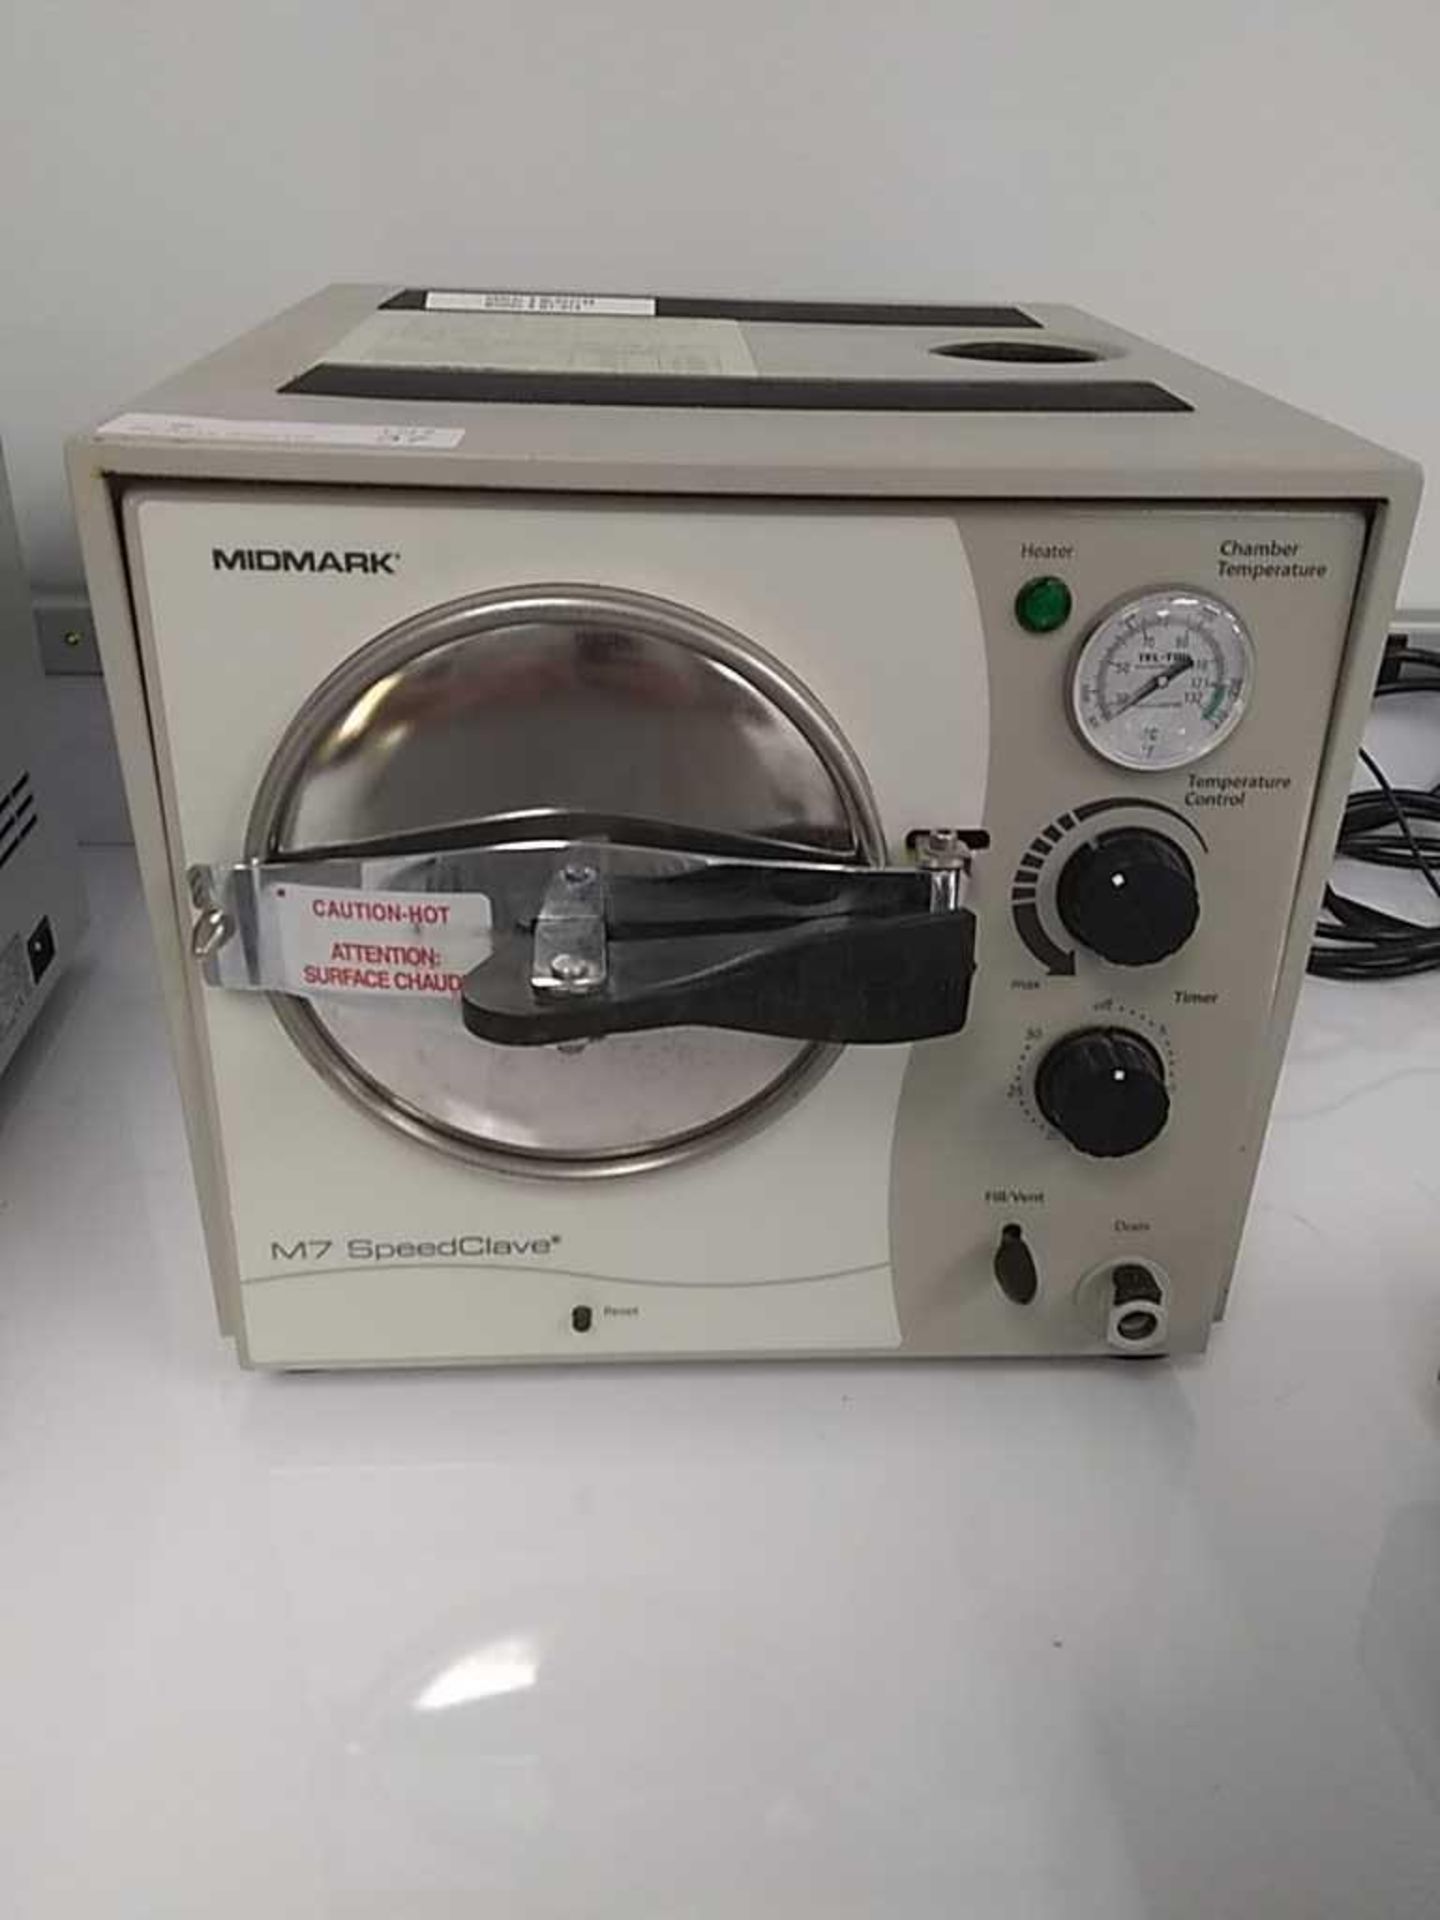 Midmark Model M7 SpeedClave Benchtop Autoclave - Image 3 of 6